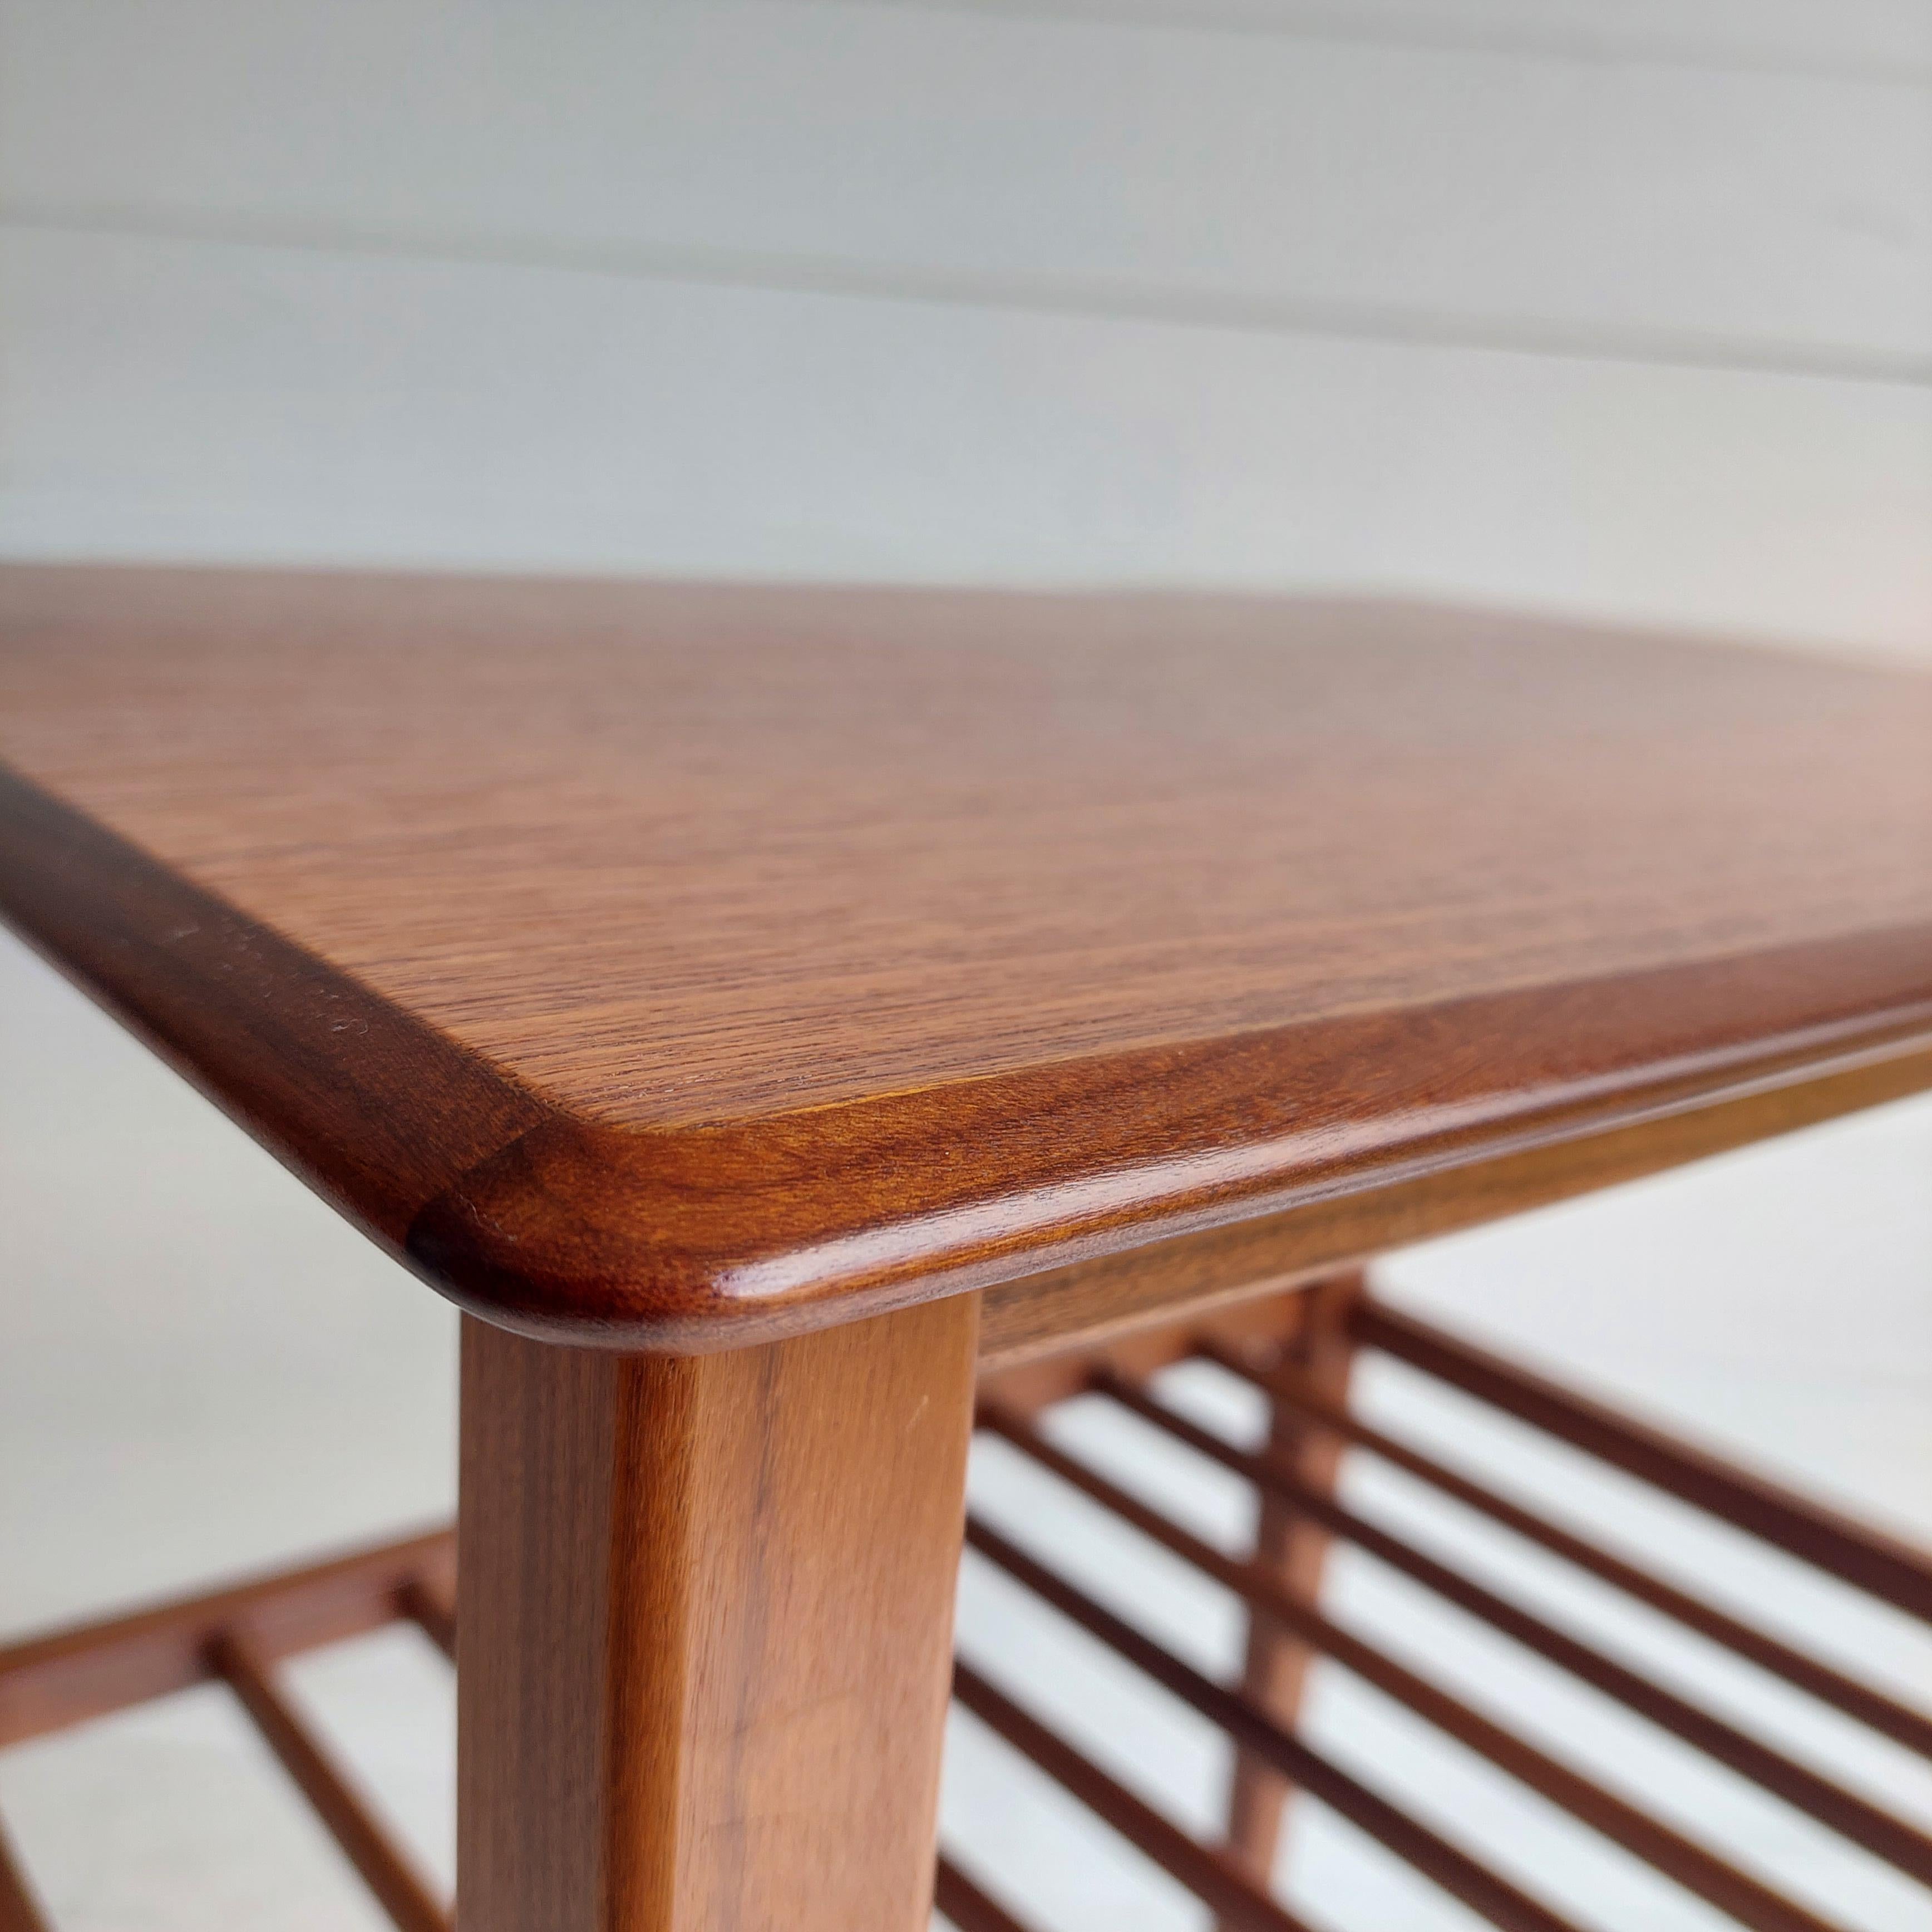 British Midcentury Teak Occasional Table by Richard Hornby for Fyne Ladye 60s